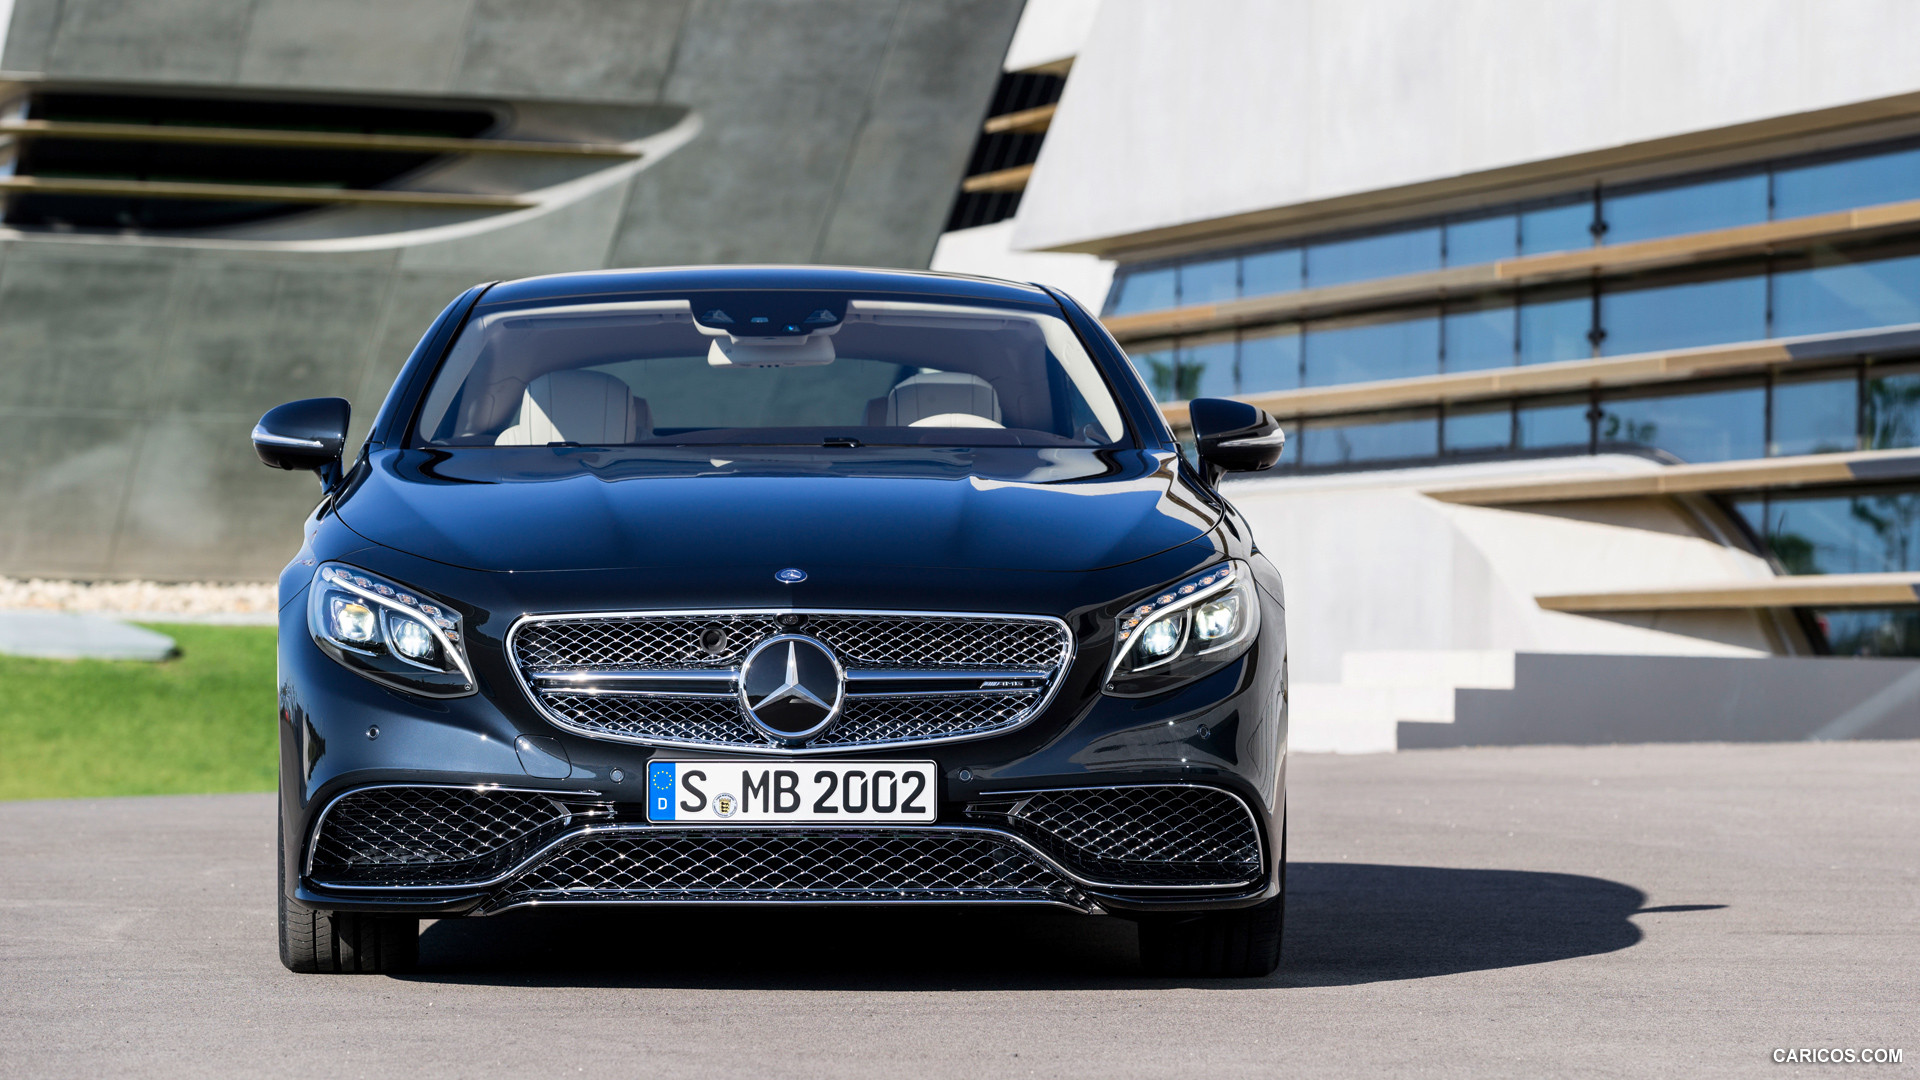 2015 Mercedes-Benz S65 AMG Coupe (Anthracite Blue) - Front, #5 of 101